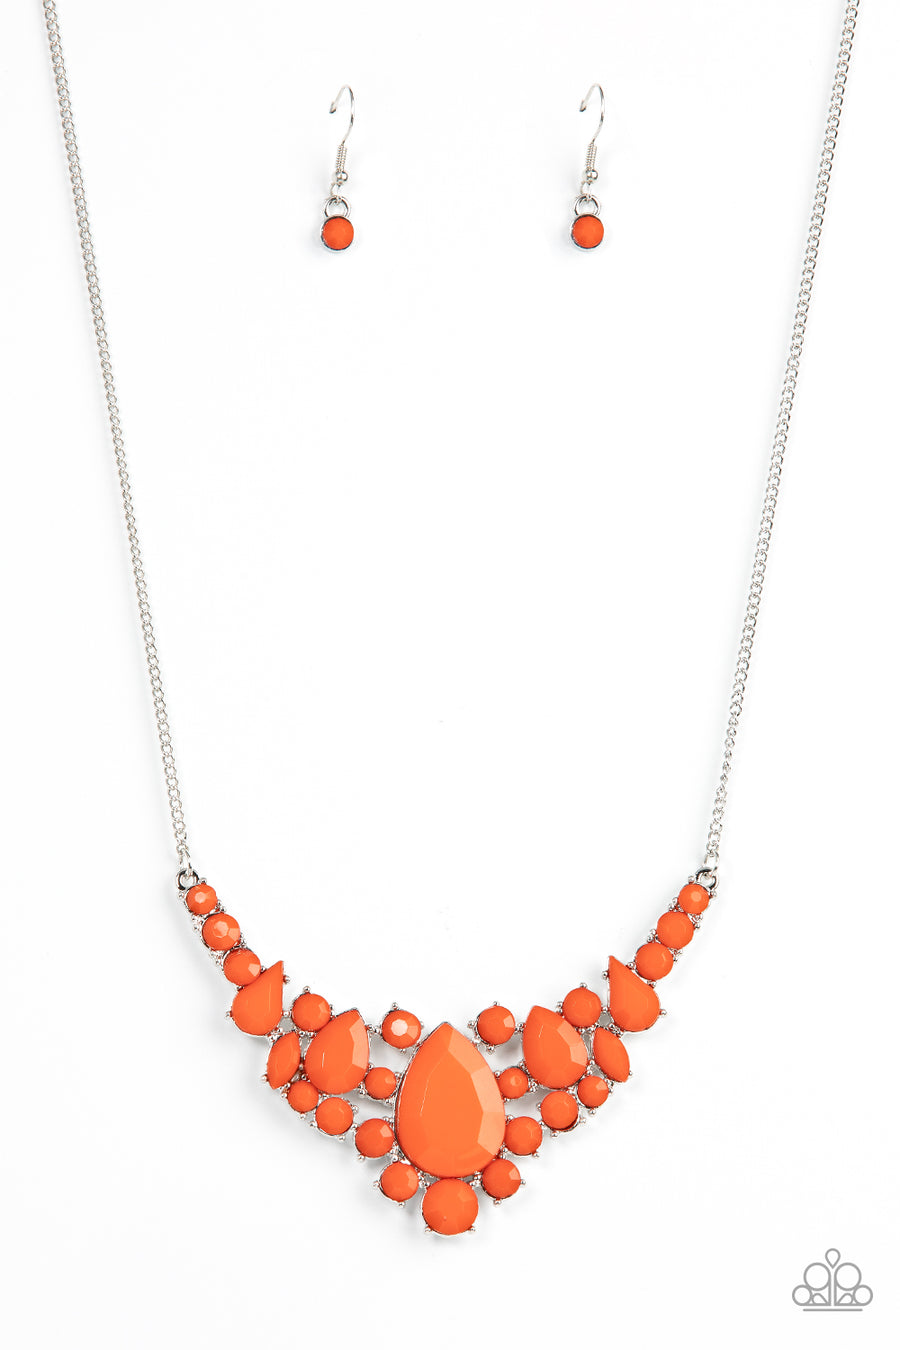 Bali Ballroom - Orange and Silver Necklace - Paparazzi Accessories - A faceted collection of round, teardrop, and marquise style orange beads coalesce around an oversized orange teardrop bead, resulting in a dramatic centerpiece below the collar.